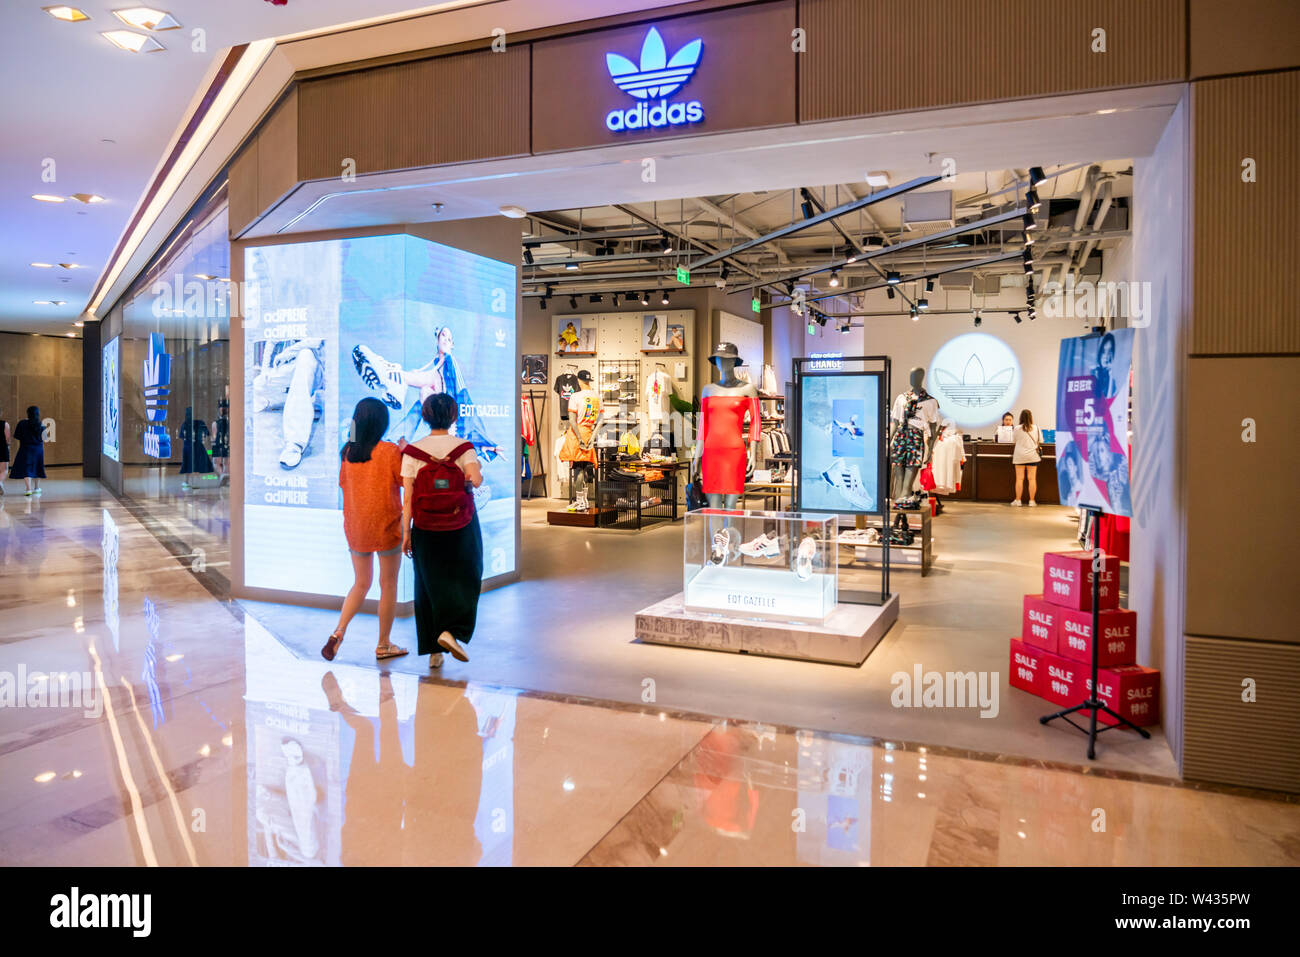 Adidas Originals, a line of casual sports clothing under German  multinational sportswear brand Adidas, store and logo seen in Shanghai with  customers walking into it Stock Photo - Alamy